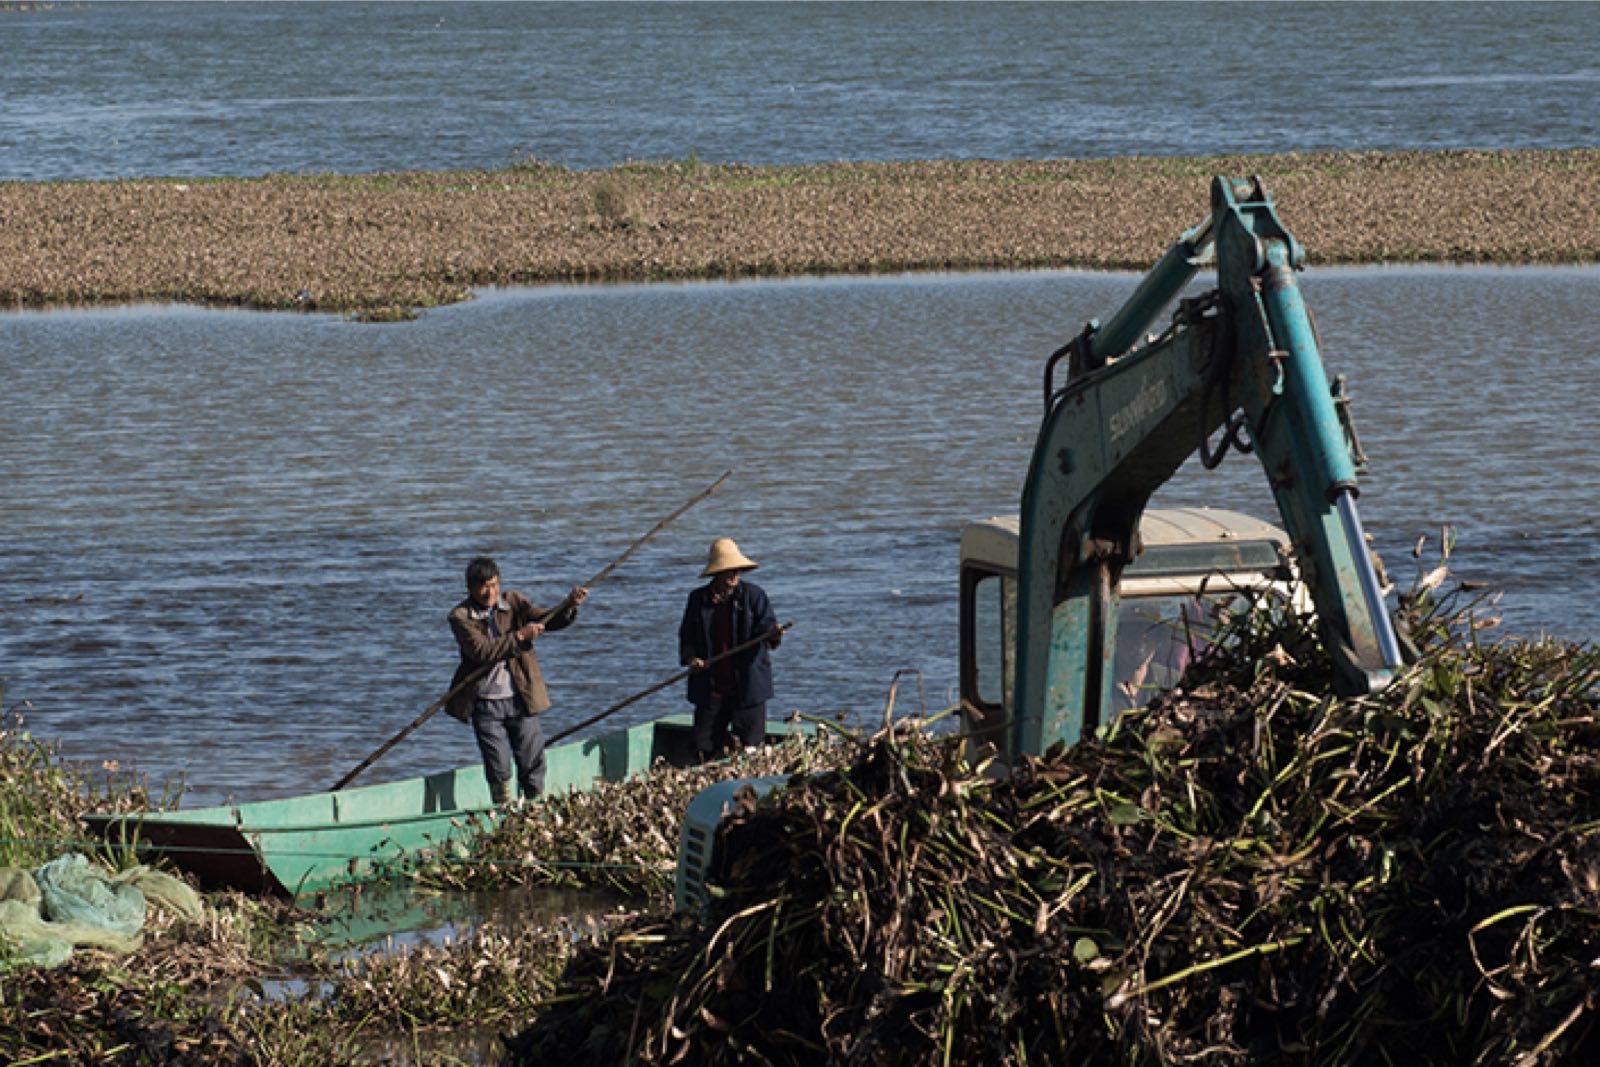 Residents remove water hyacinth in White Horse village, north of Erhai Lake, on April 20. Photo: Chen Liang/Caixin